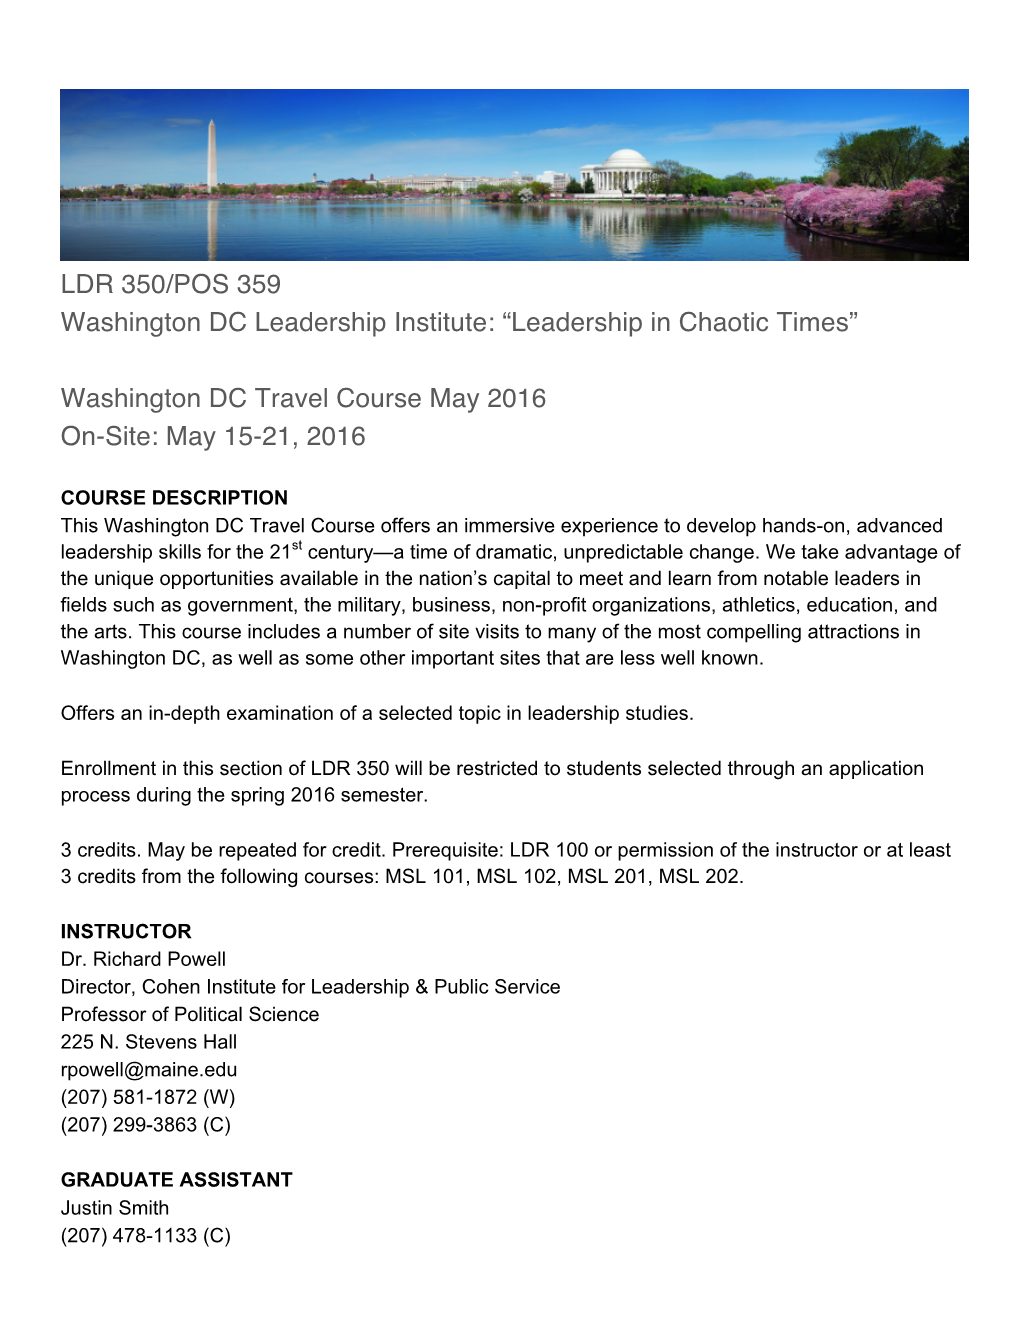 LDR 350/POS 359 Washington DC Leadership Institute: “Leadership in Chaotic Times”